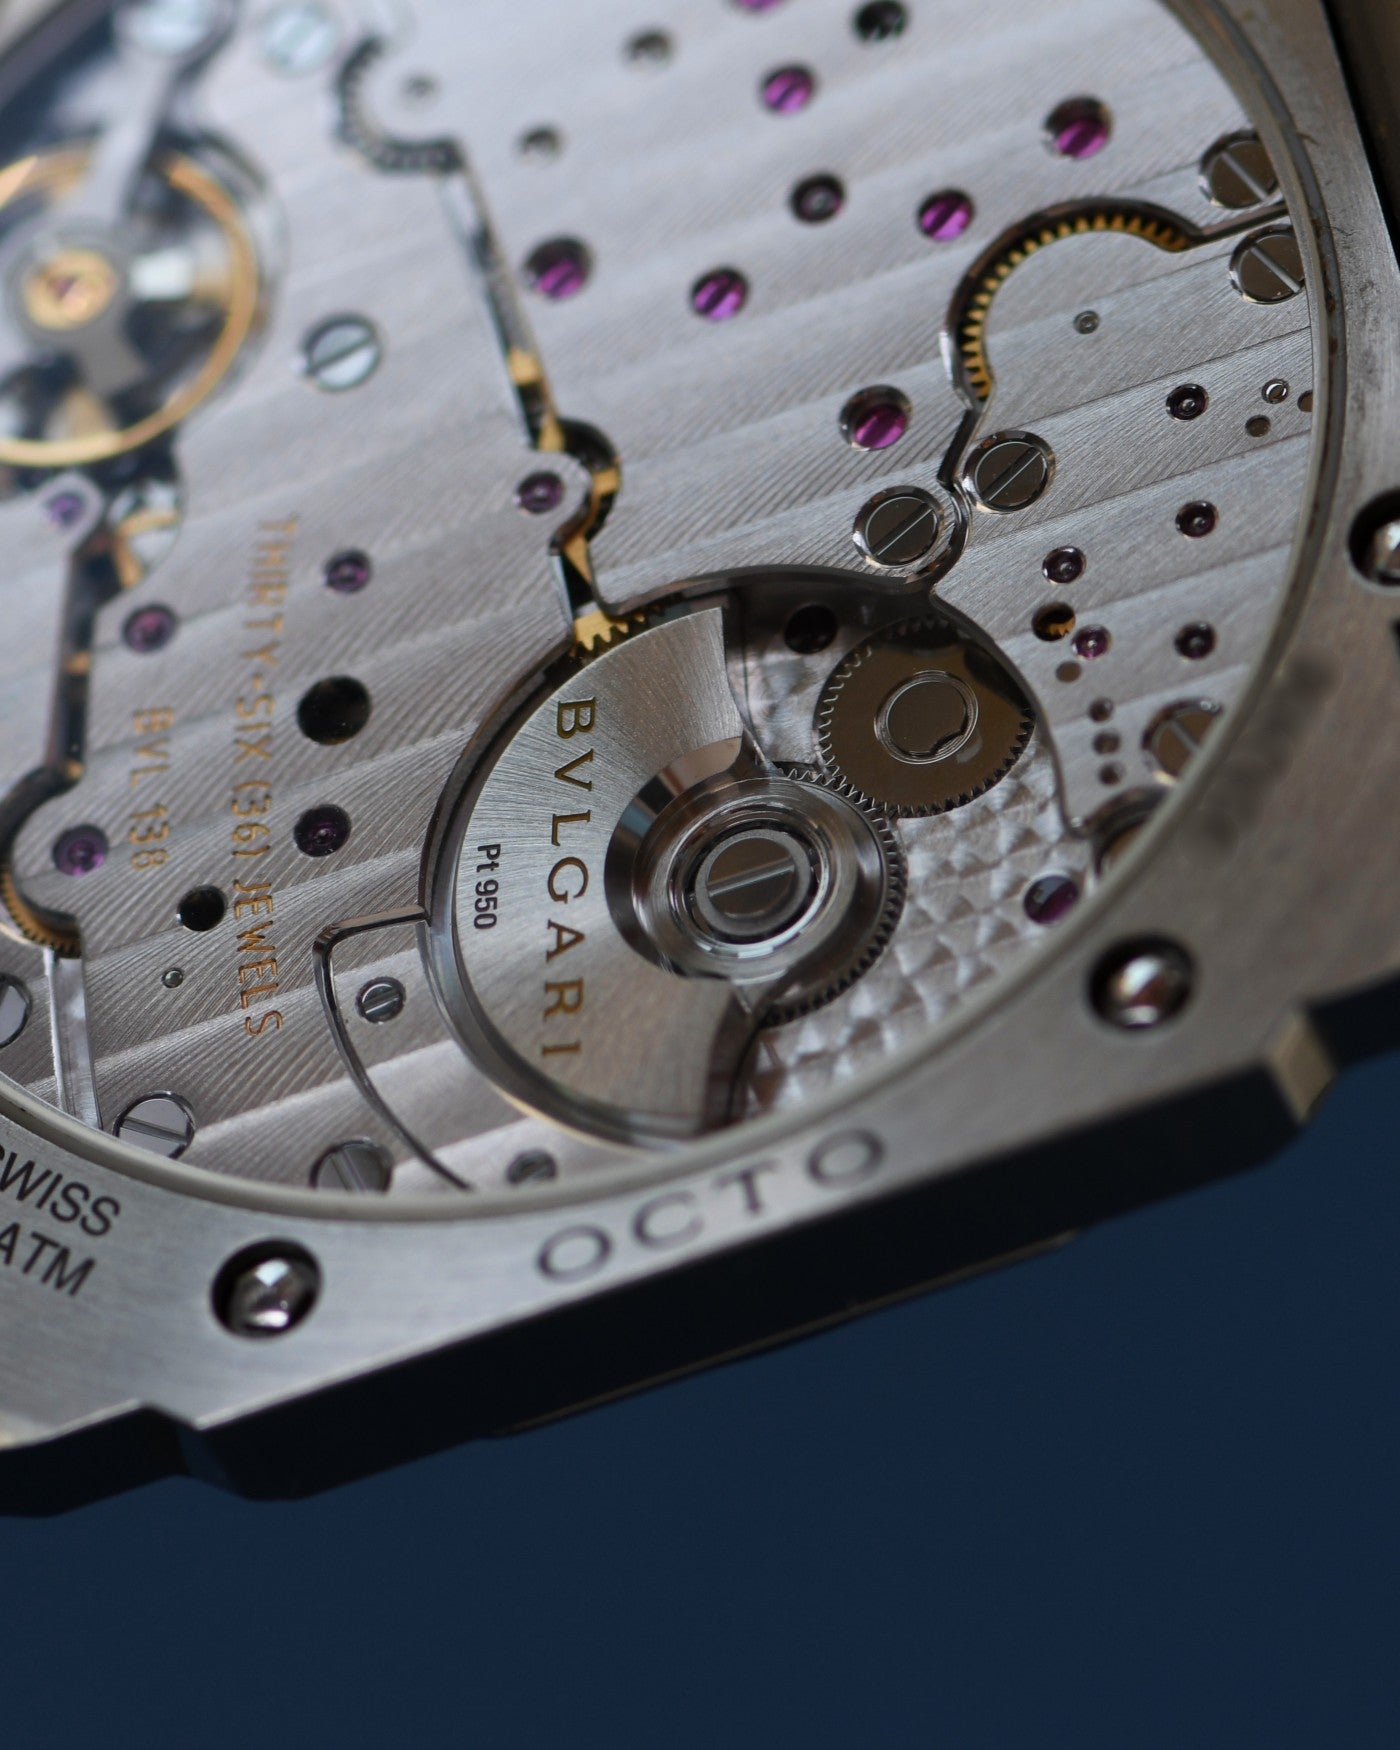 Bvlgari Octo Finissimo Automatic – The Horology Club